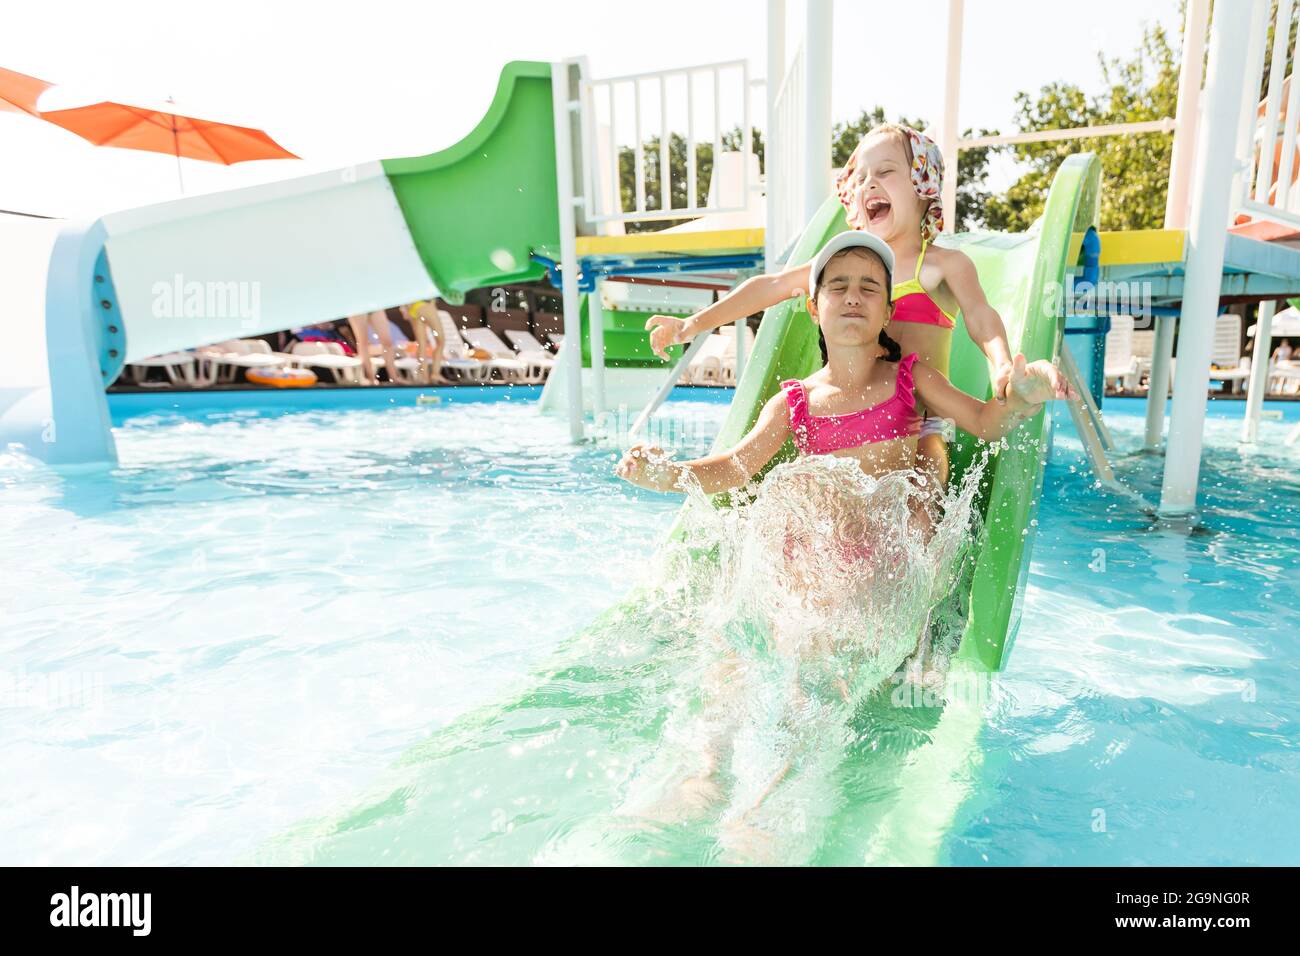 Happy child playing in swimming pool. Summer vacation concept Stock Photo